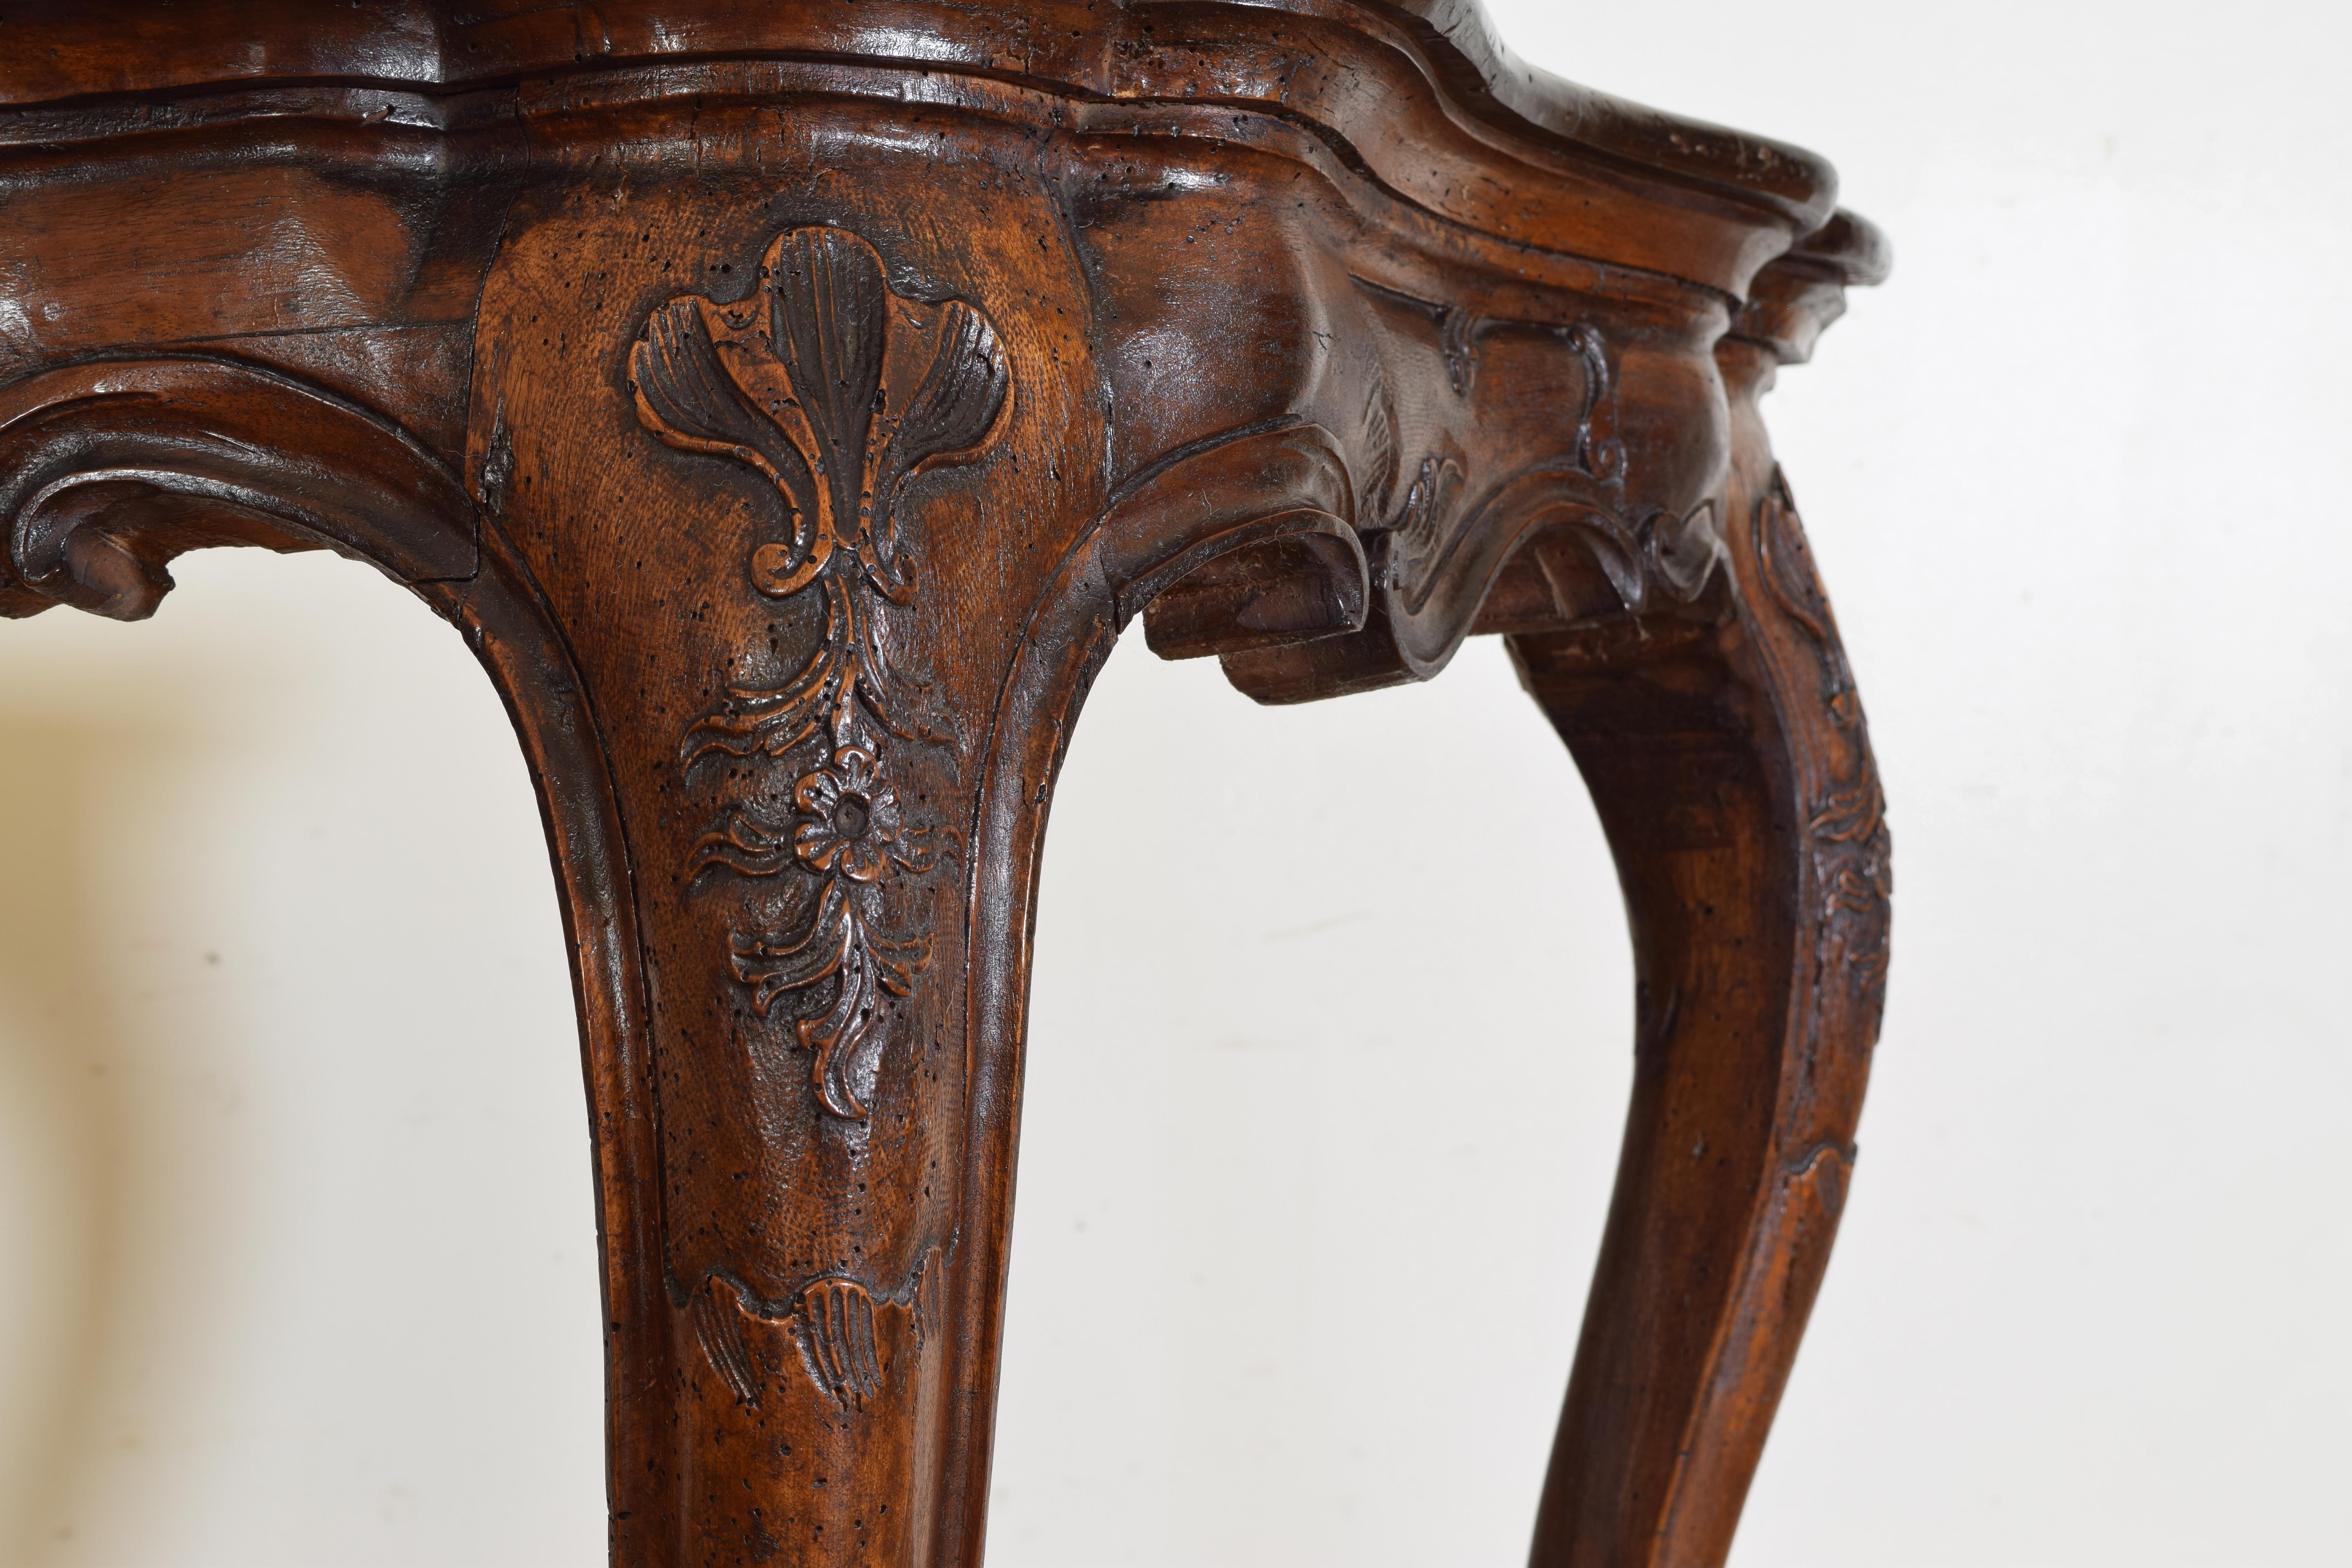 Pair Italian, Venice, Carved Walnut Rococo Period Console Tables, mid 18th cen. For Sale 2